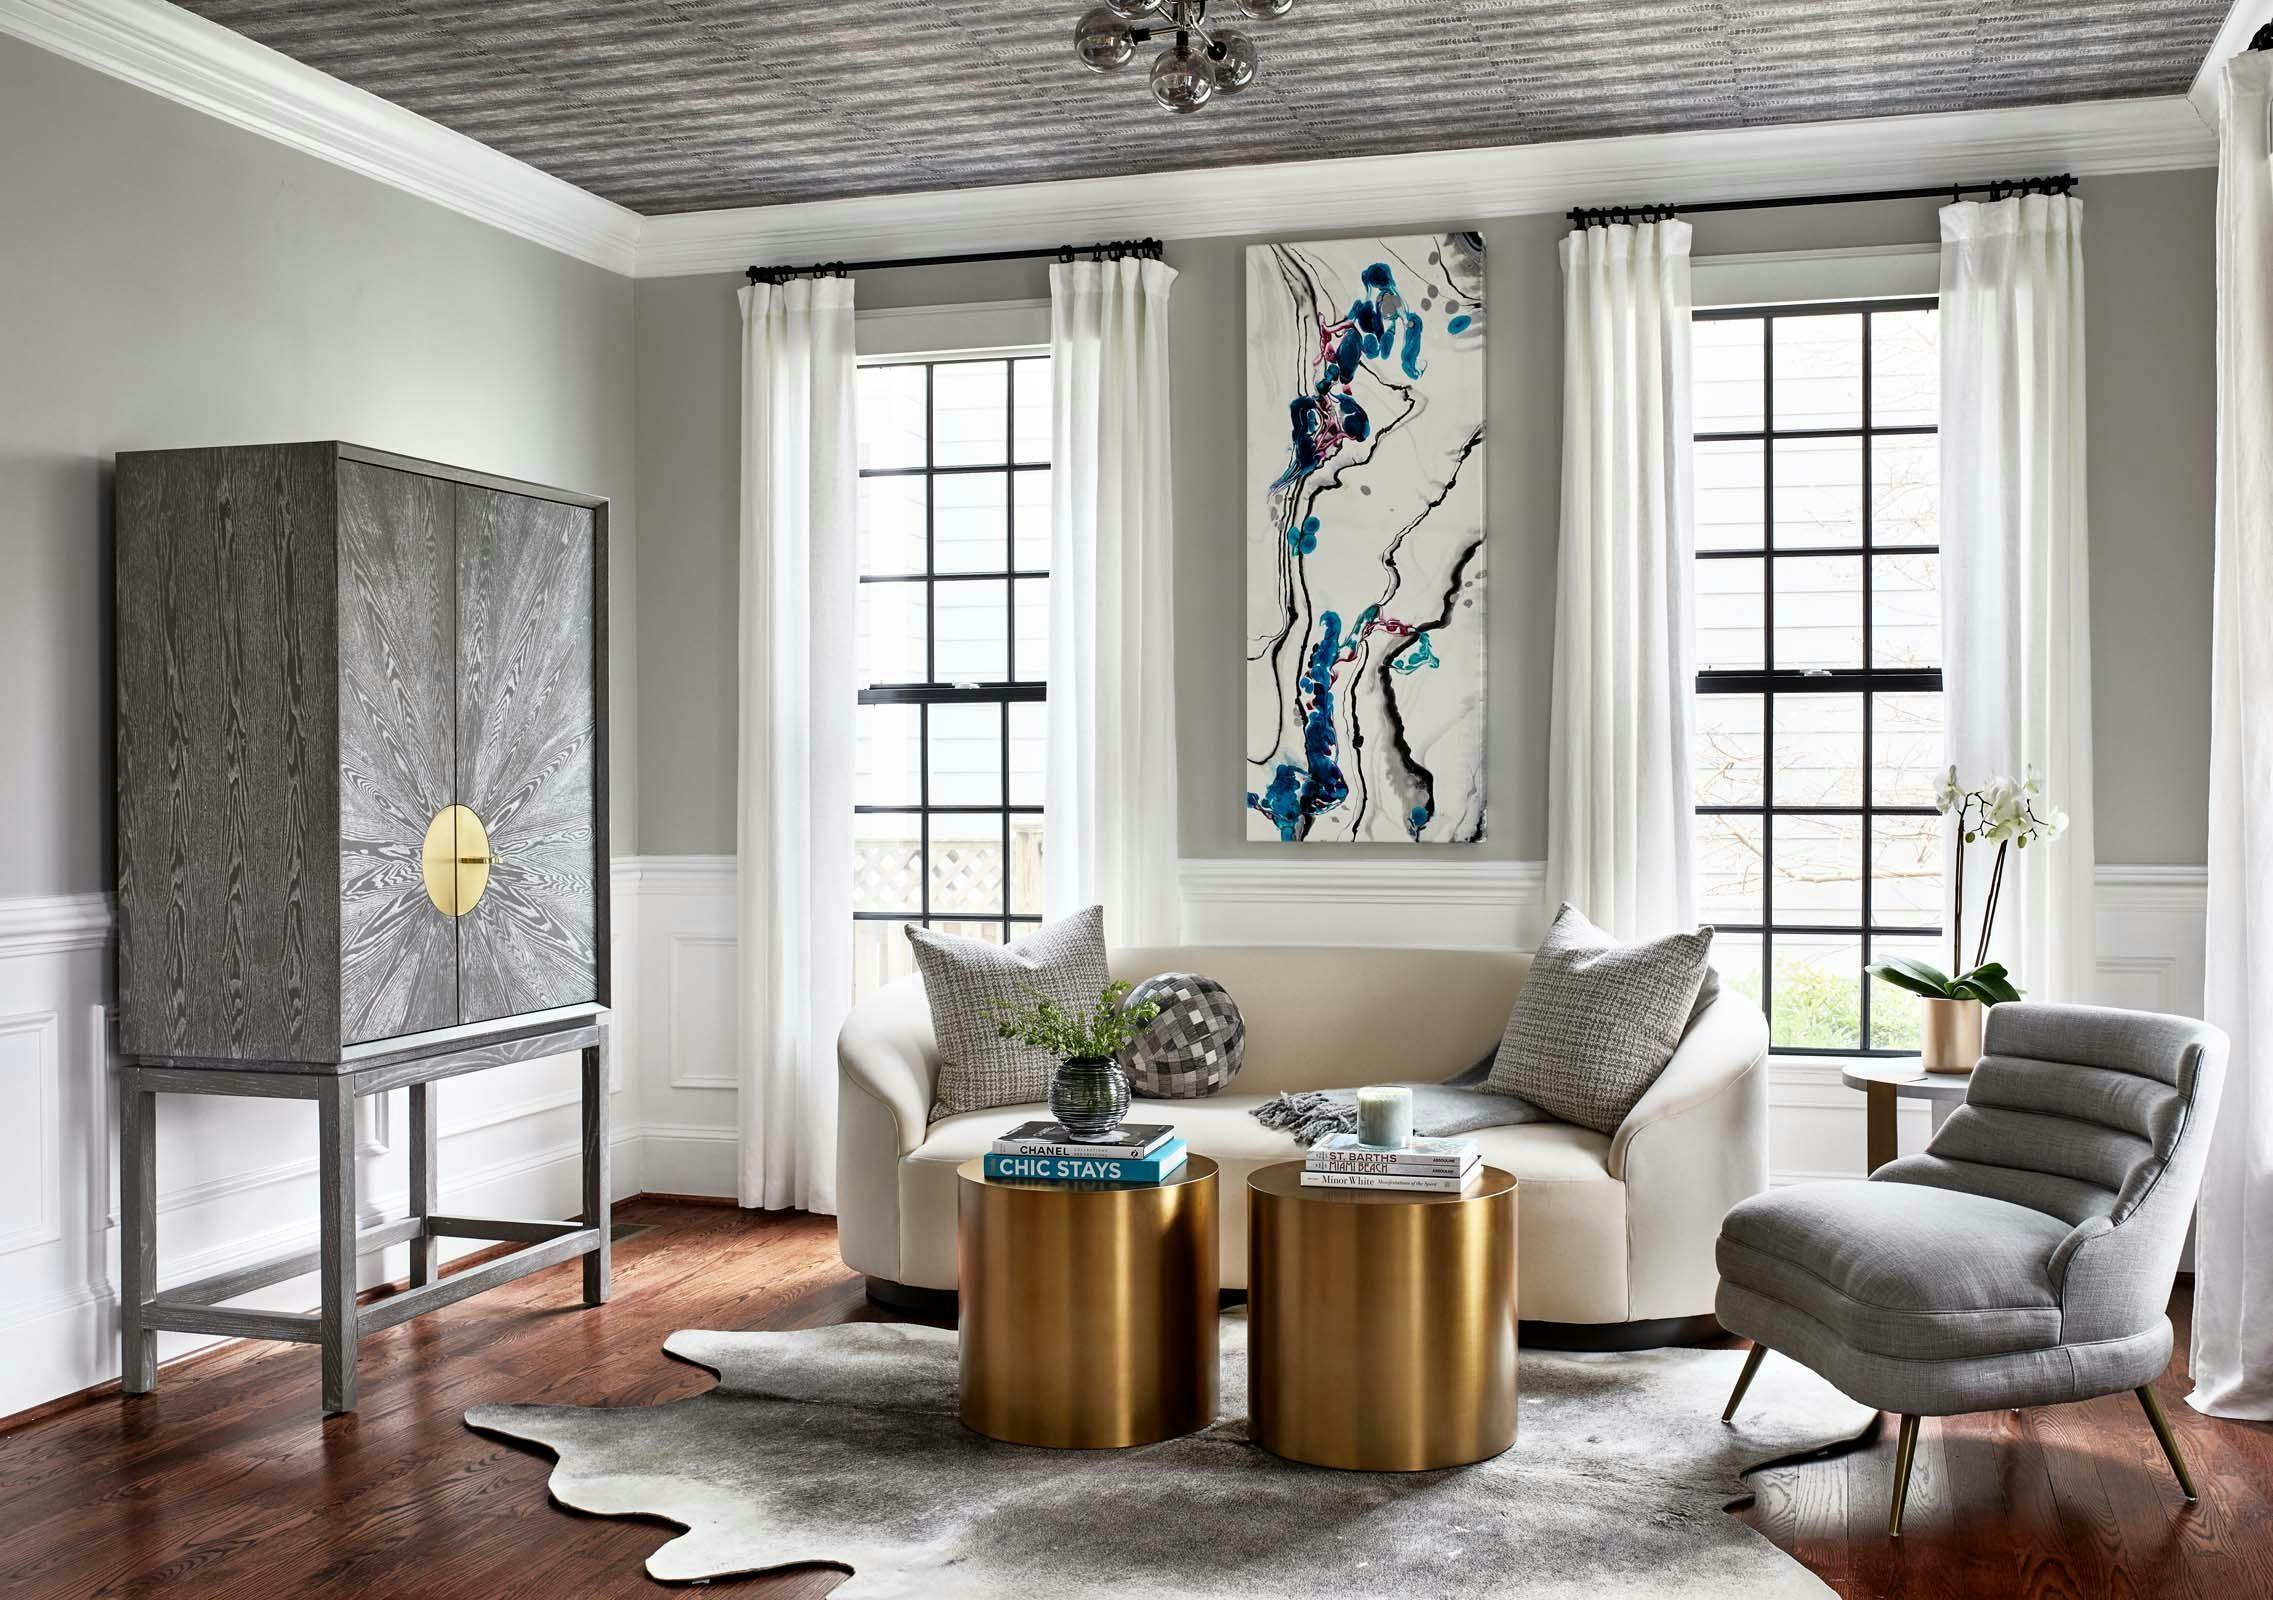 Living room with white and grey couches, grey chest, and copper-colored table